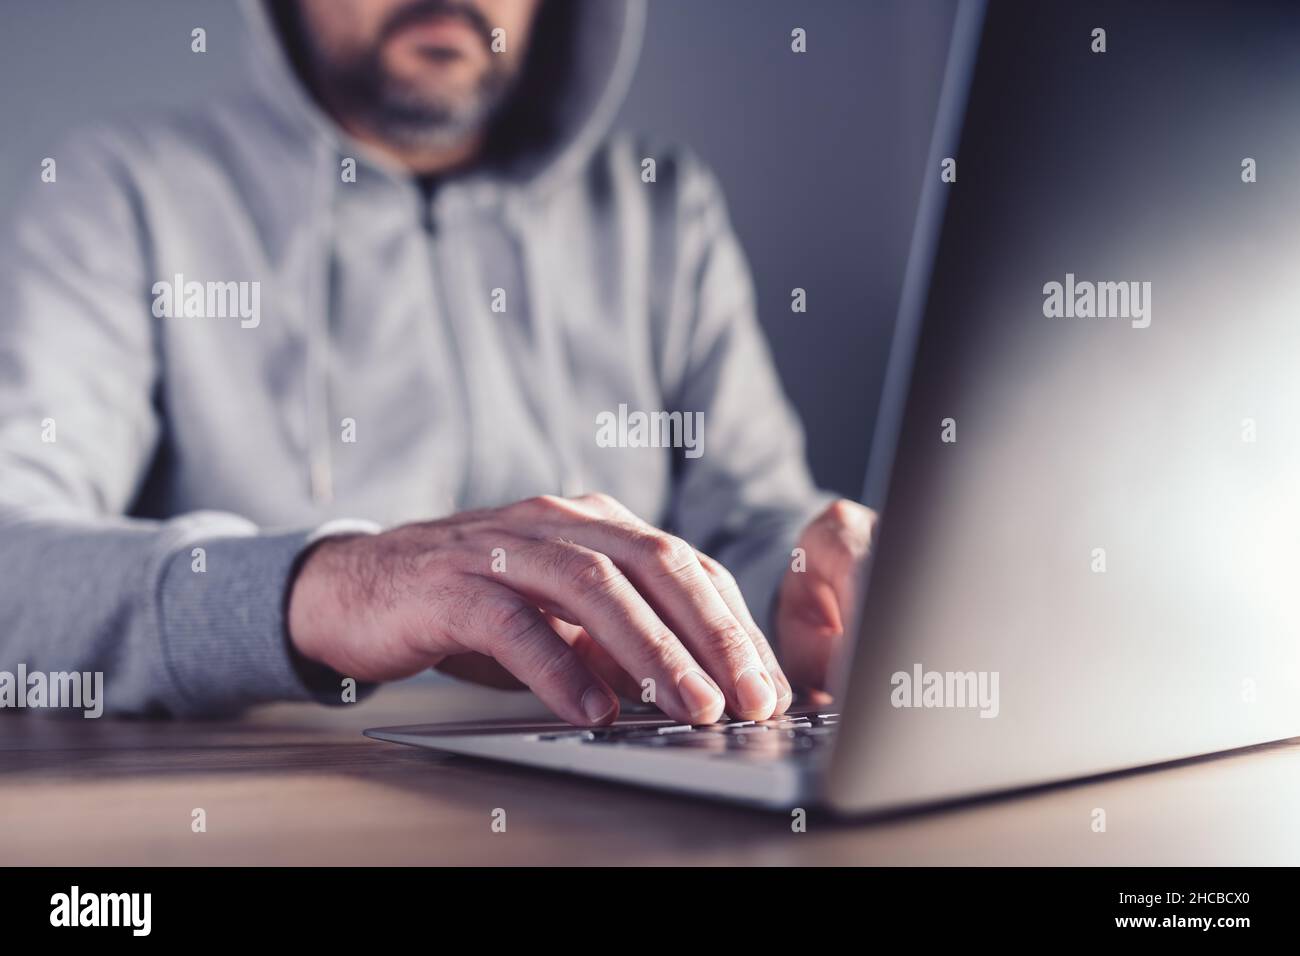 Grey hat hacker concept, man working on laptop to discover weaknesses in computer network, selective focus Stock Photo